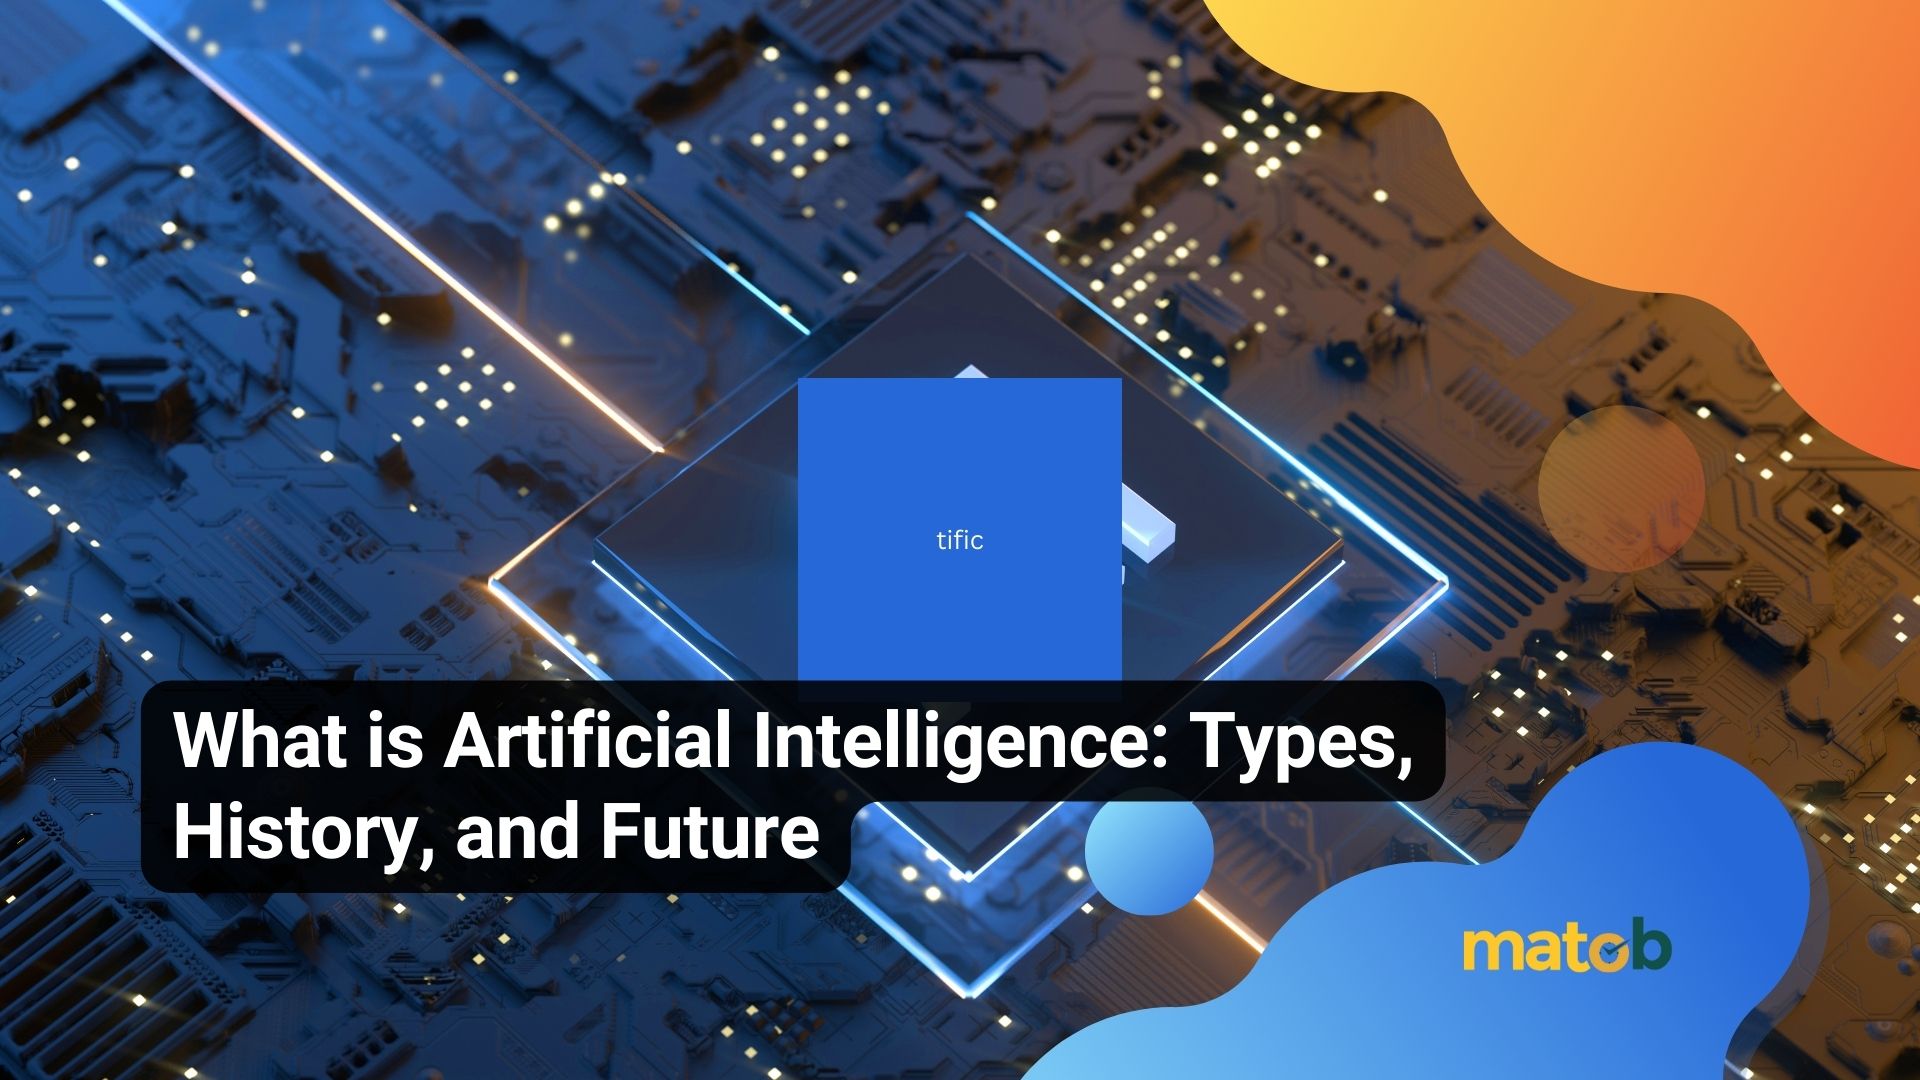 What is Artificial Intelligence: Types, History, and Future